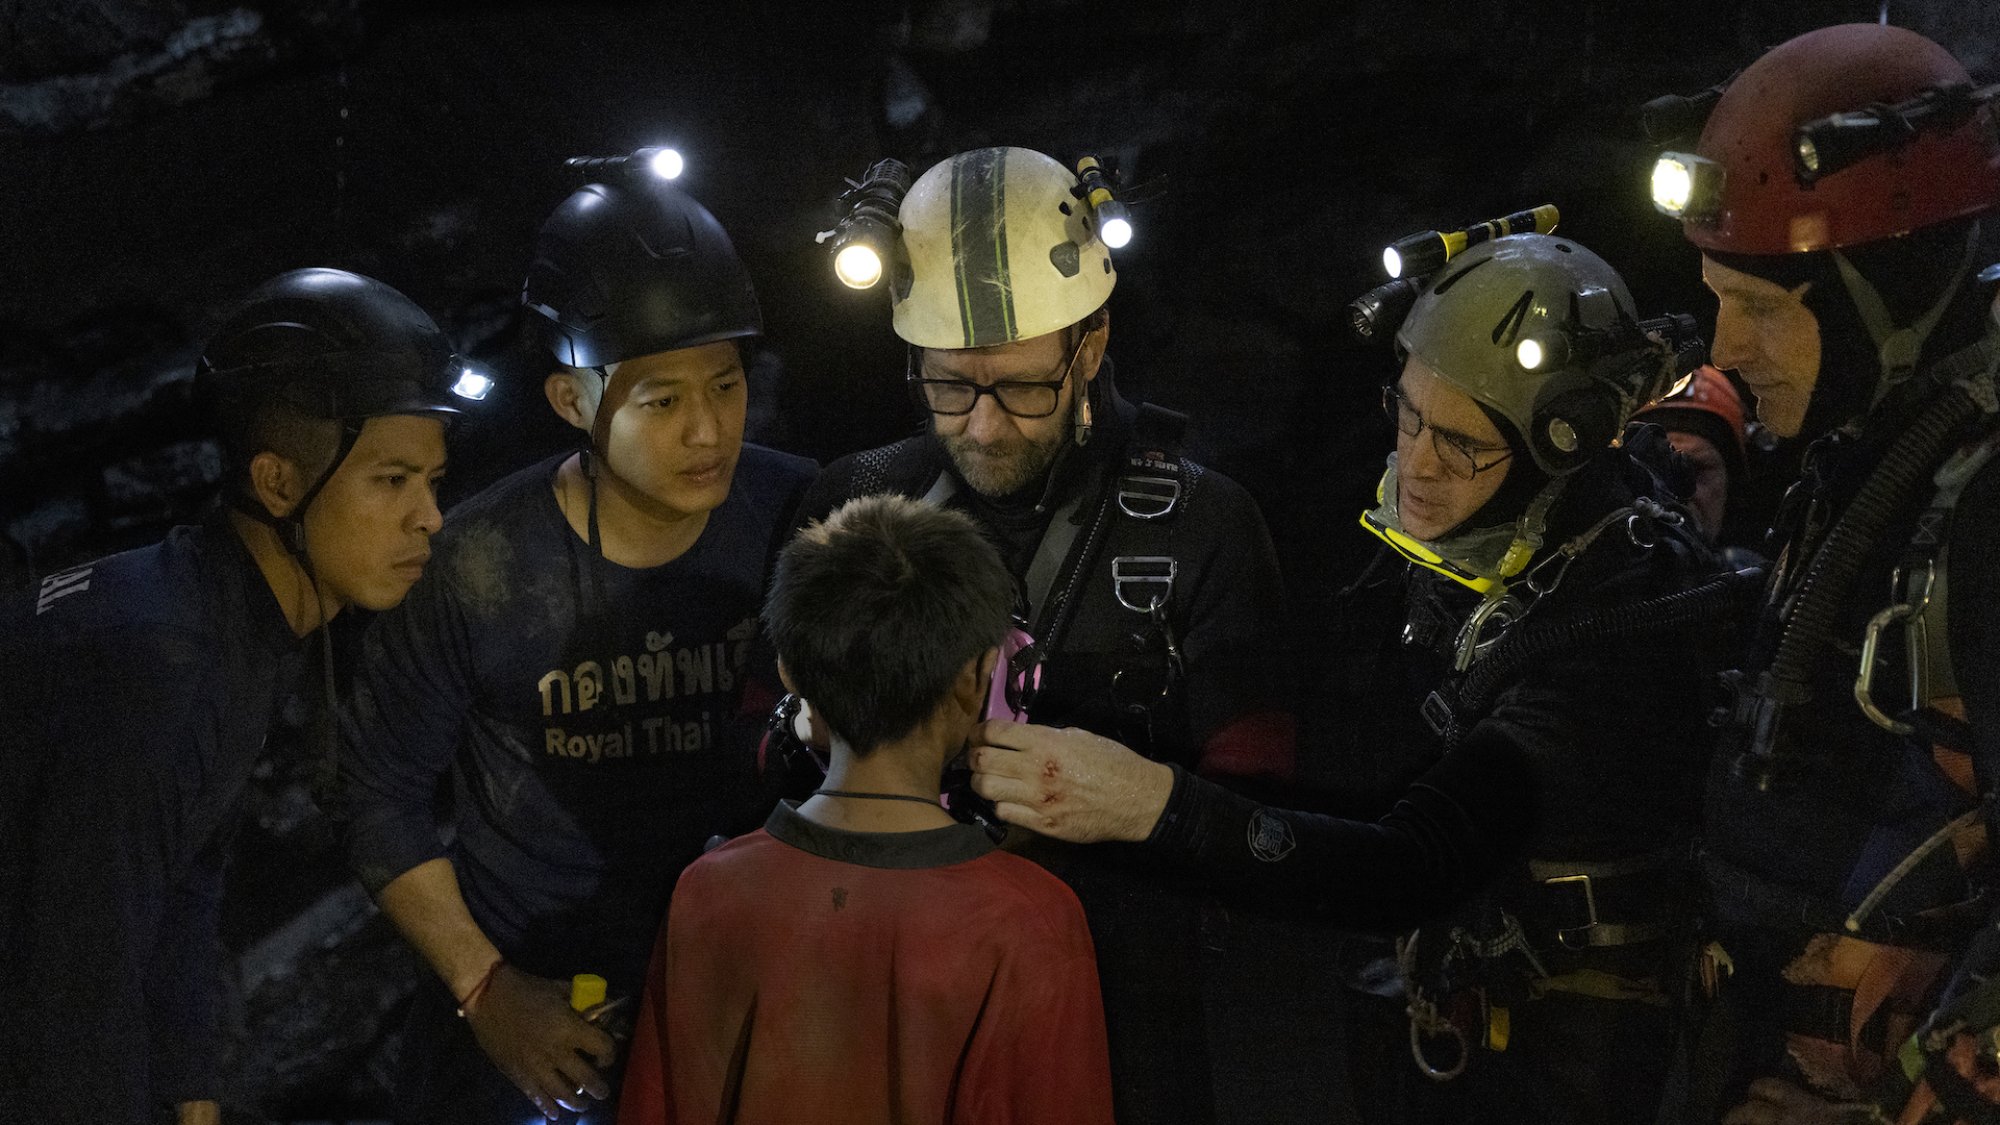 Five divers with headlamps talk to a small boy.